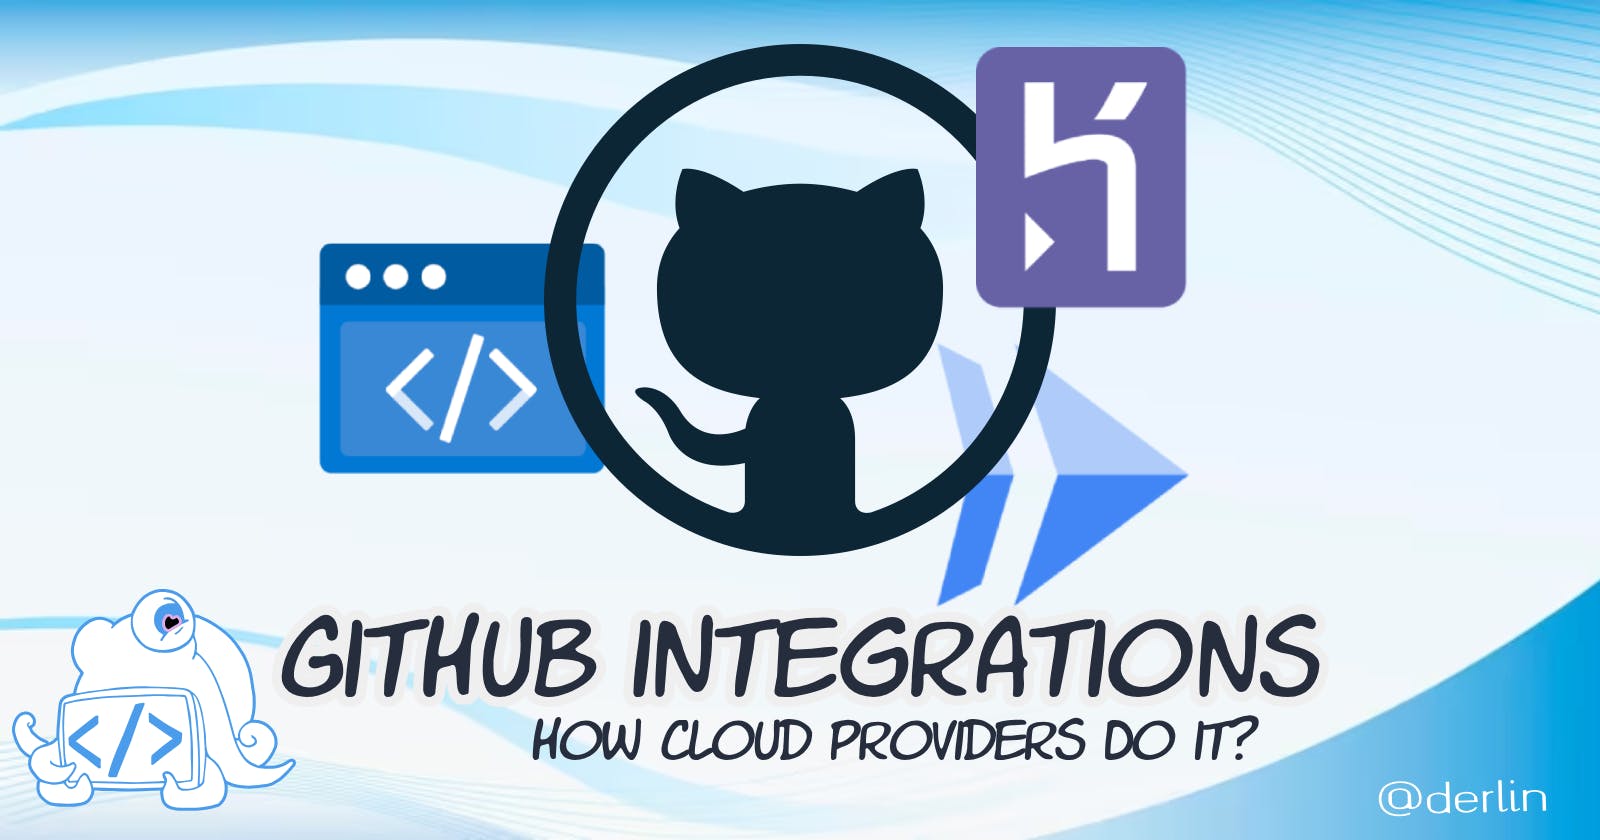 Ever wondered how cloud providers (PaaS) integrate with GitHub? I did.